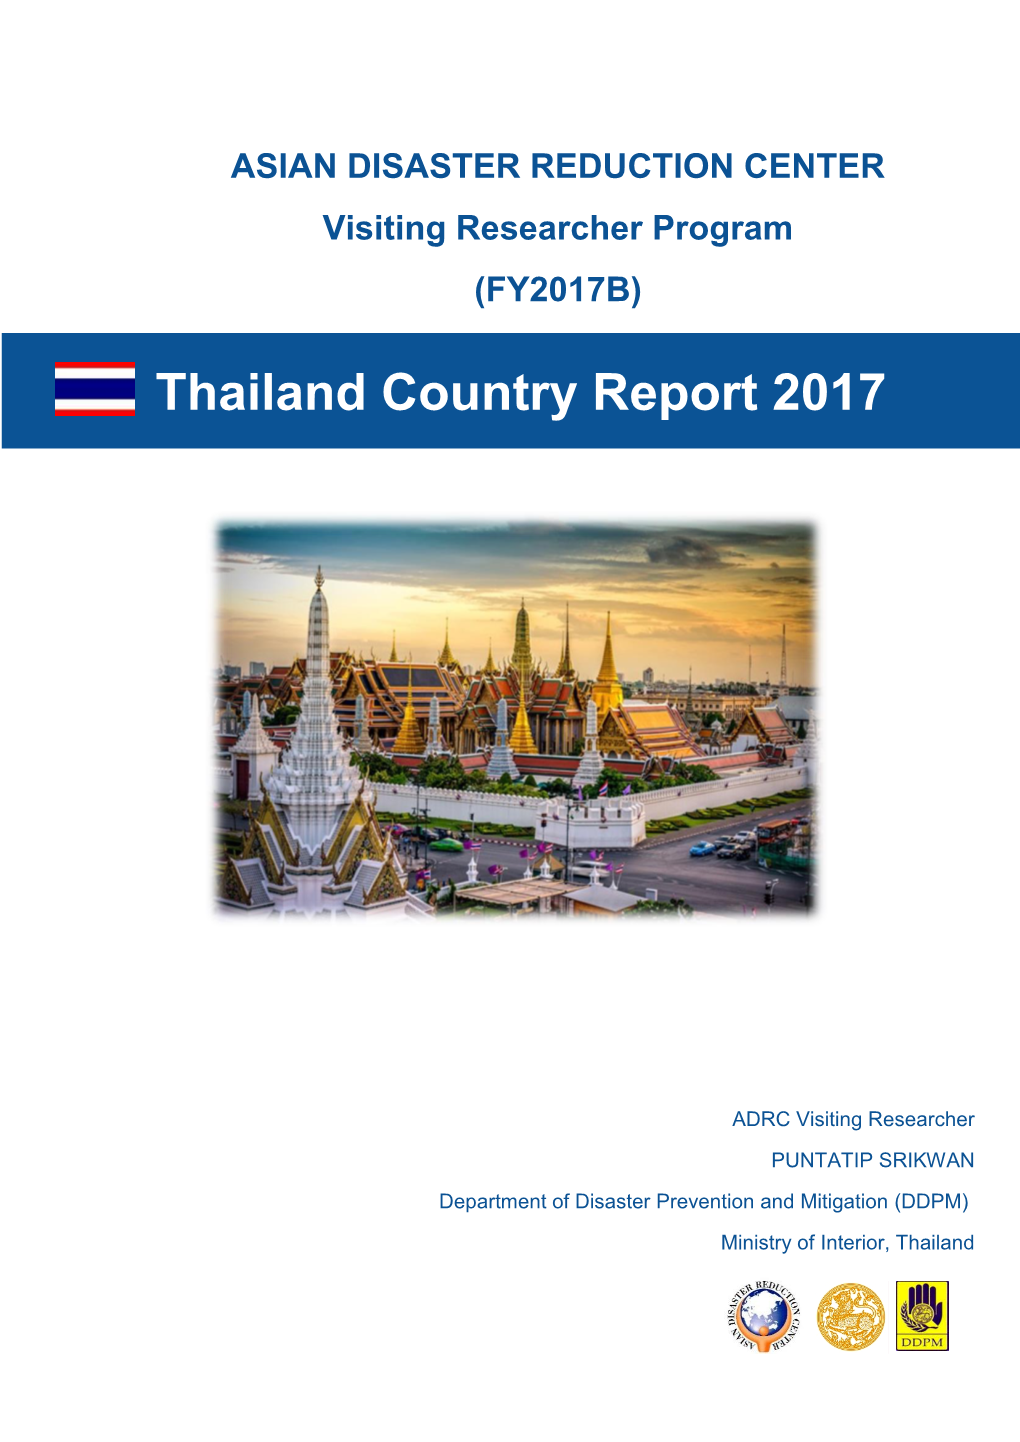 Thailand Country Report 2017